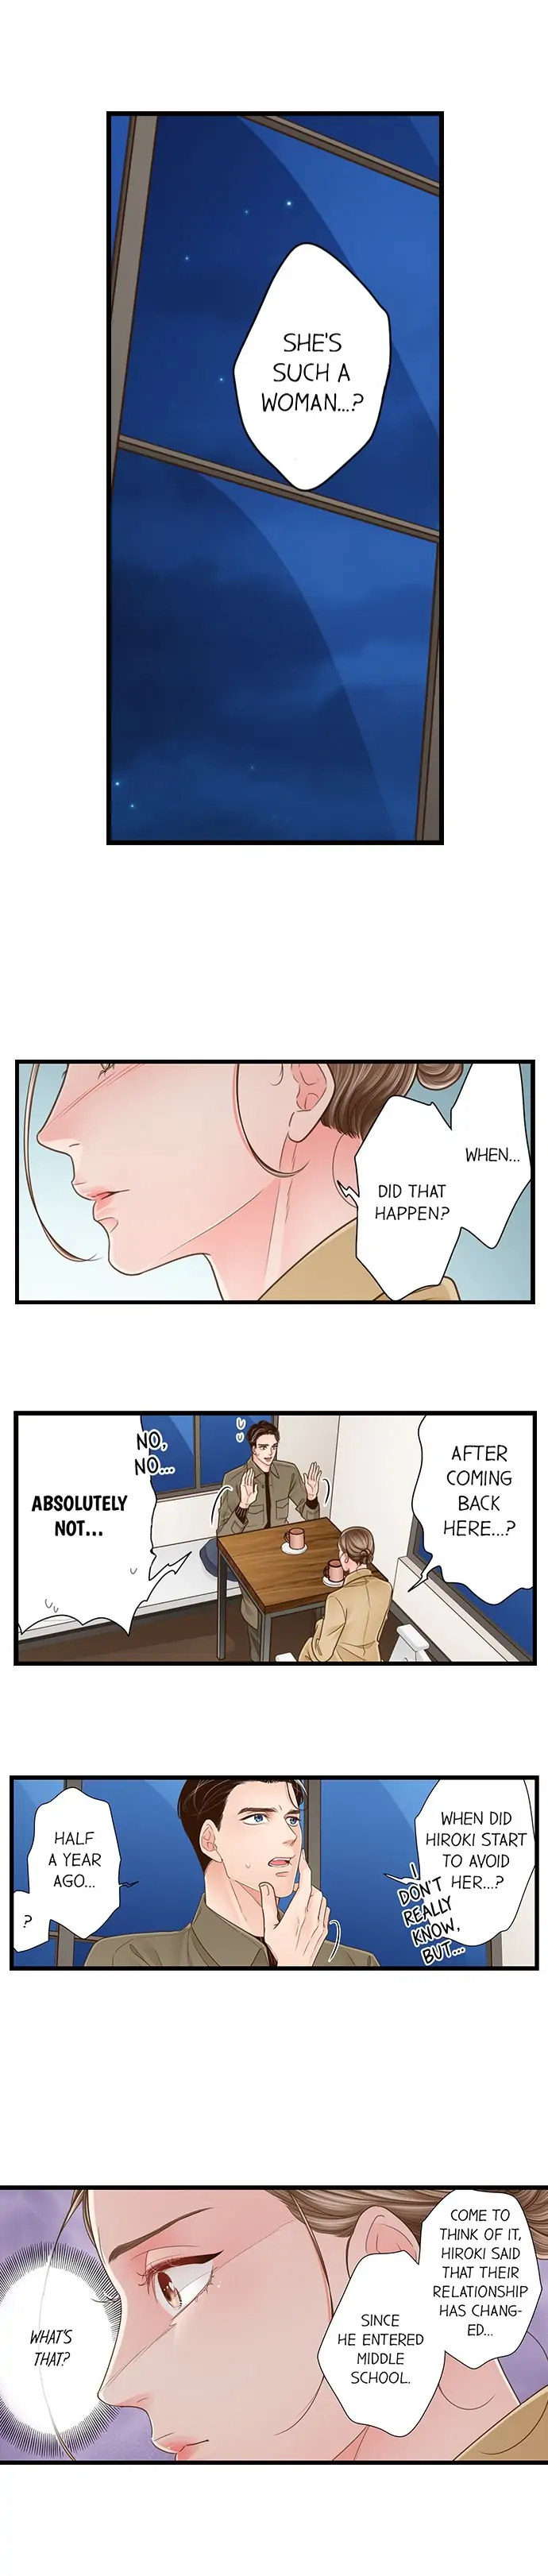 Yanagihara Is a Sex Addict - Chapter 169 Page 2